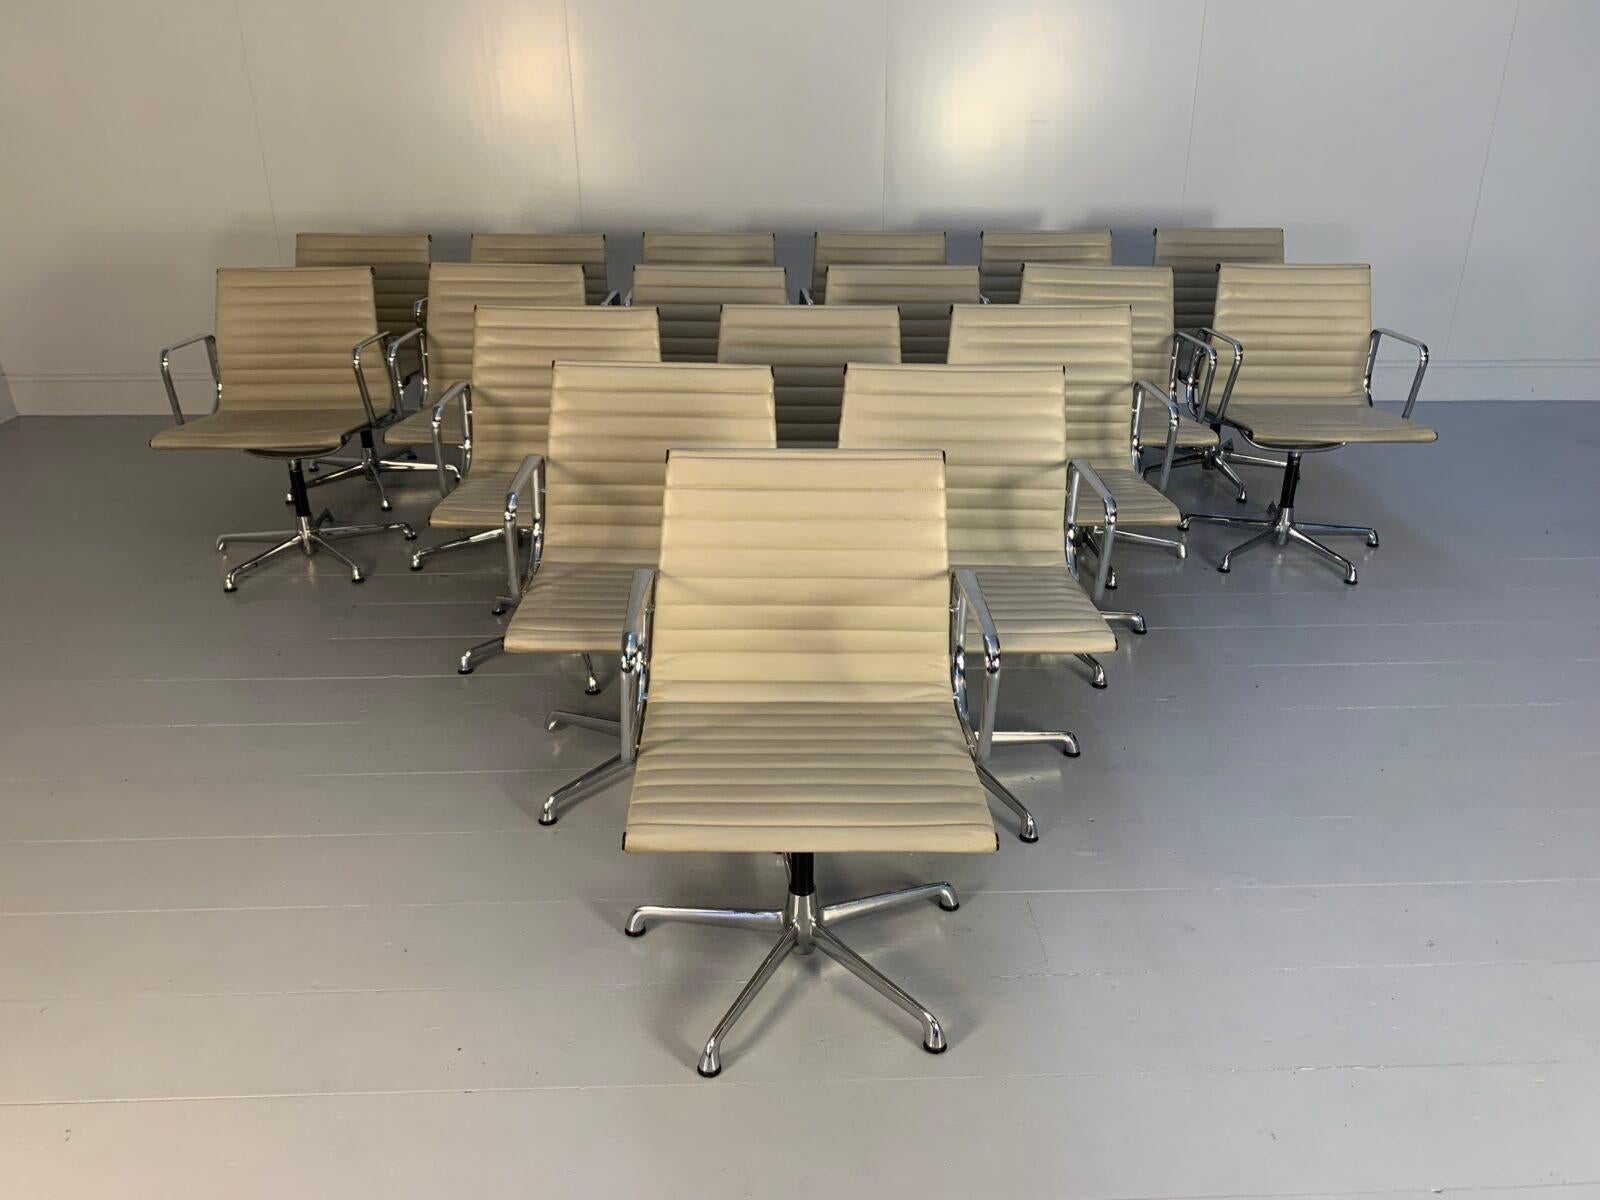 On offer on this occasion is one of the most handsome, refined suites of chairs you could ever hope to find.

This is an ultra-rare opportunity to acquire what is, unequivocally, the best of the best, it being a most spectacular, immaculate,